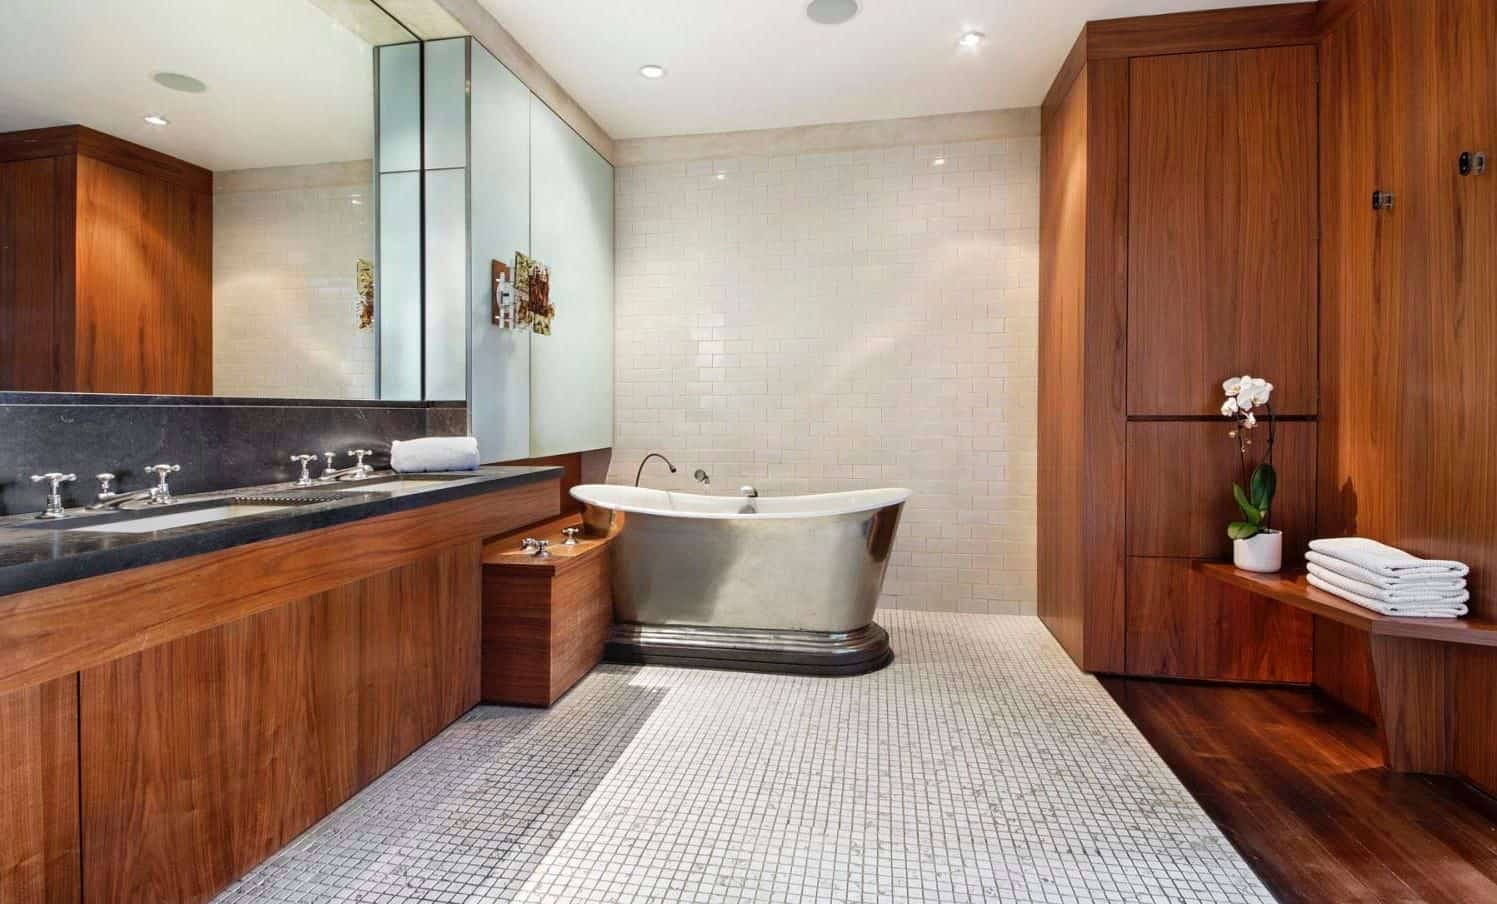 Spacious contemporary bathroom inside David Bowie's old Manhattan apartment, recently sold for $16.8 million.